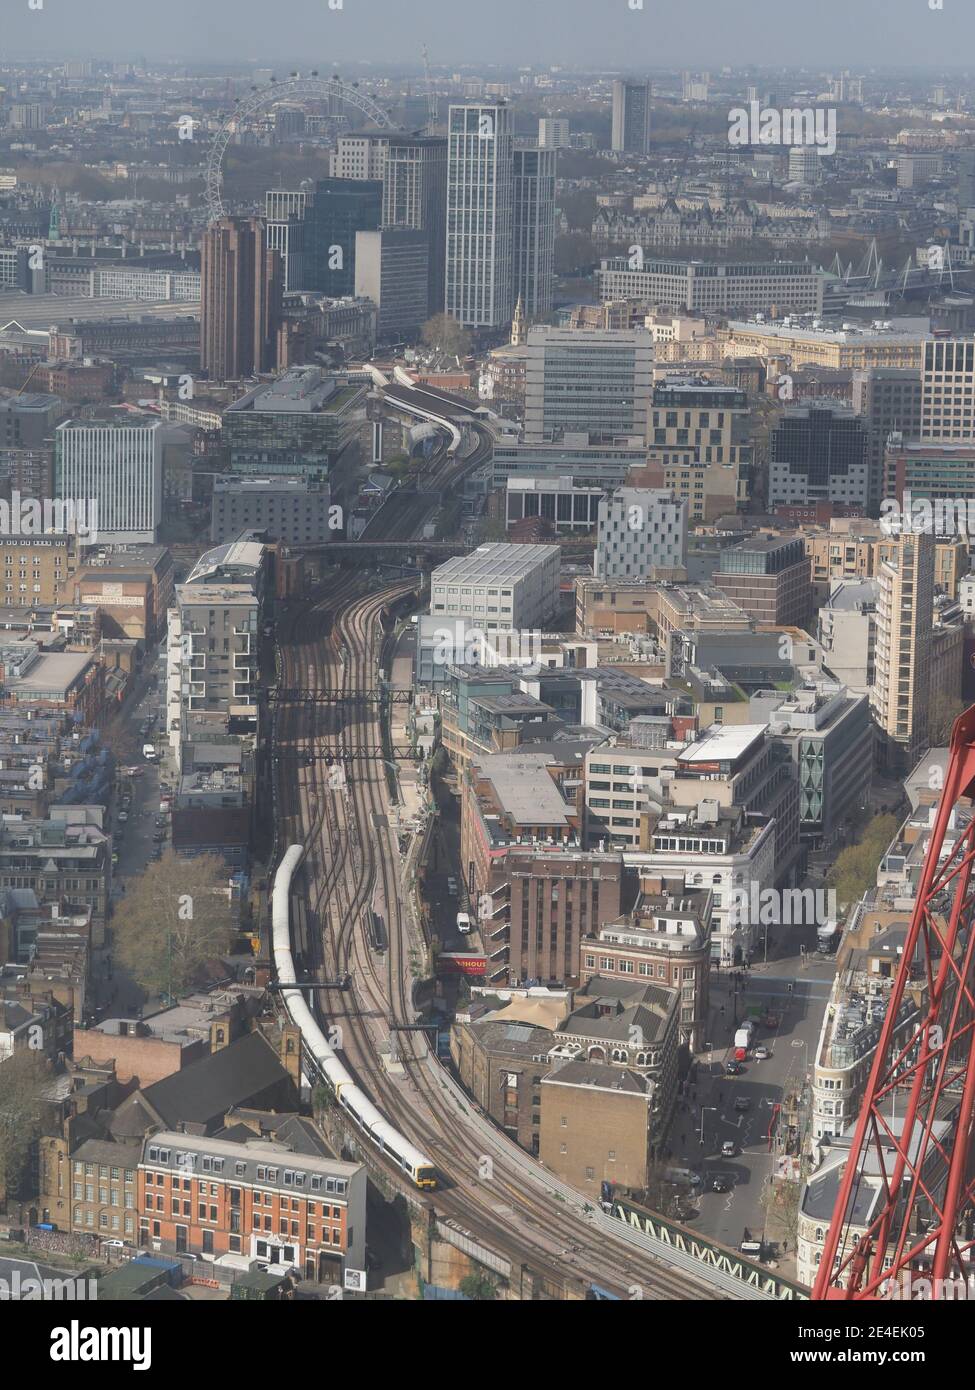 aerial view looking down on London city towards Waterloo East railway station Stock Photo